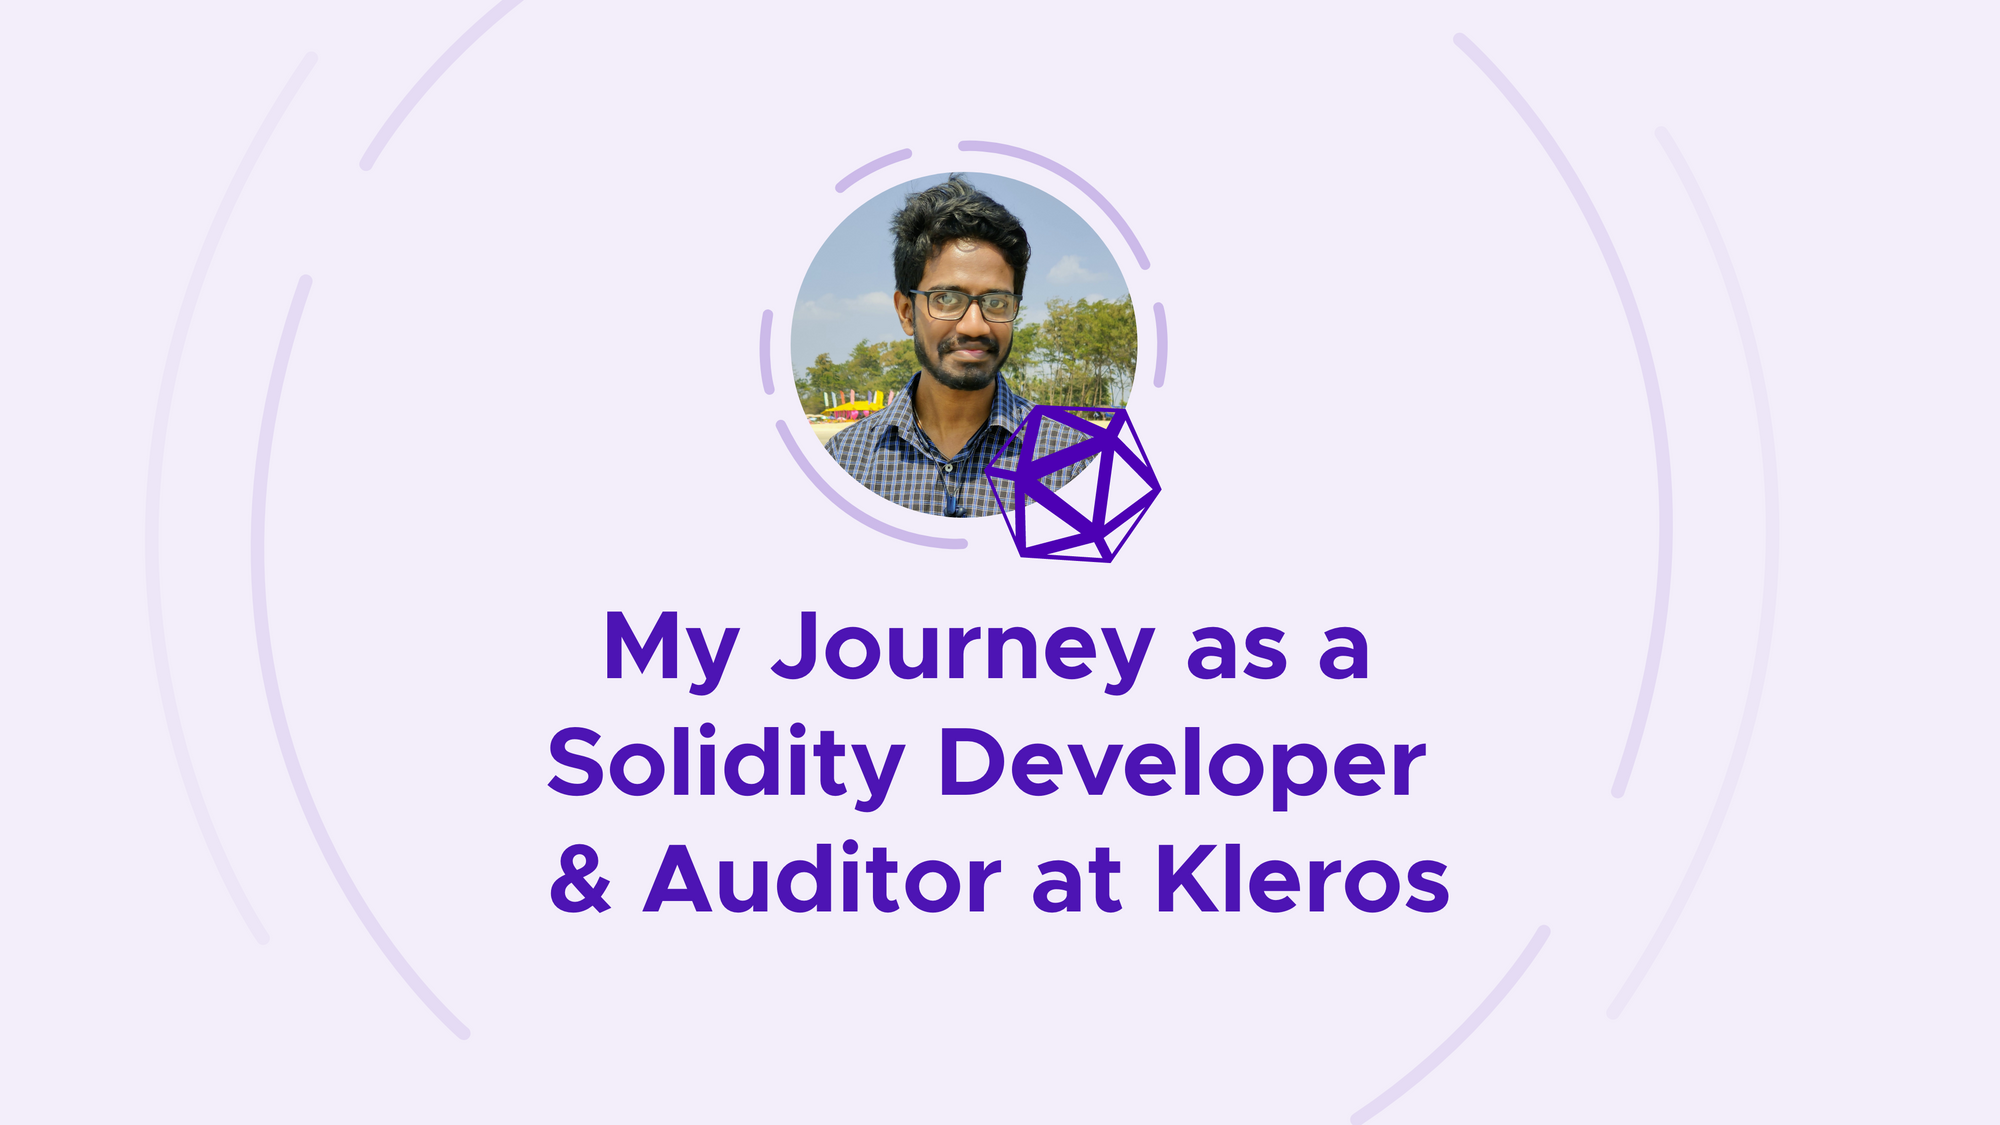 My Journey as a Solidity Developer & Auditor at Kleros